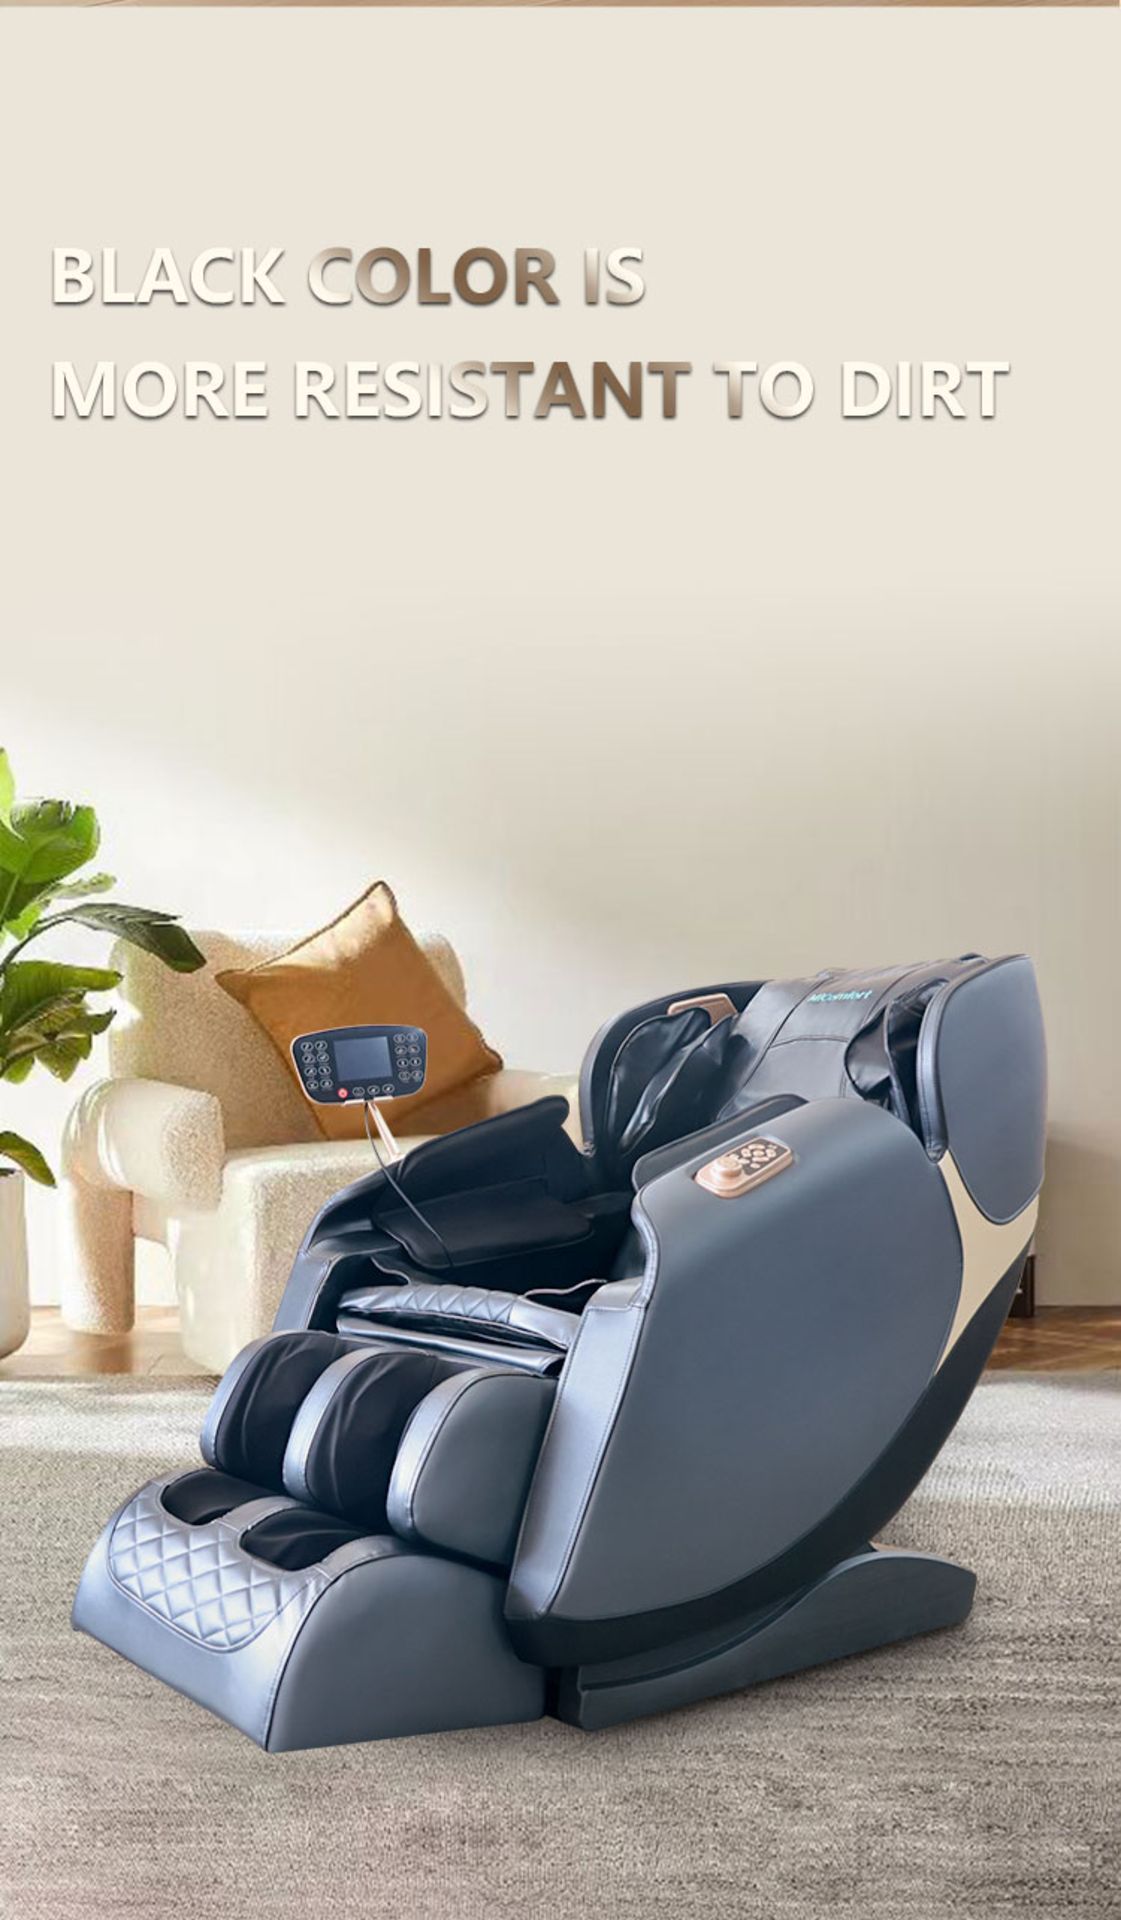 Brand New in Box Orchid Blue/Black MiComfort Full Body Massage Chair RRP £2199 *NO VAT* - Image 11 of 14